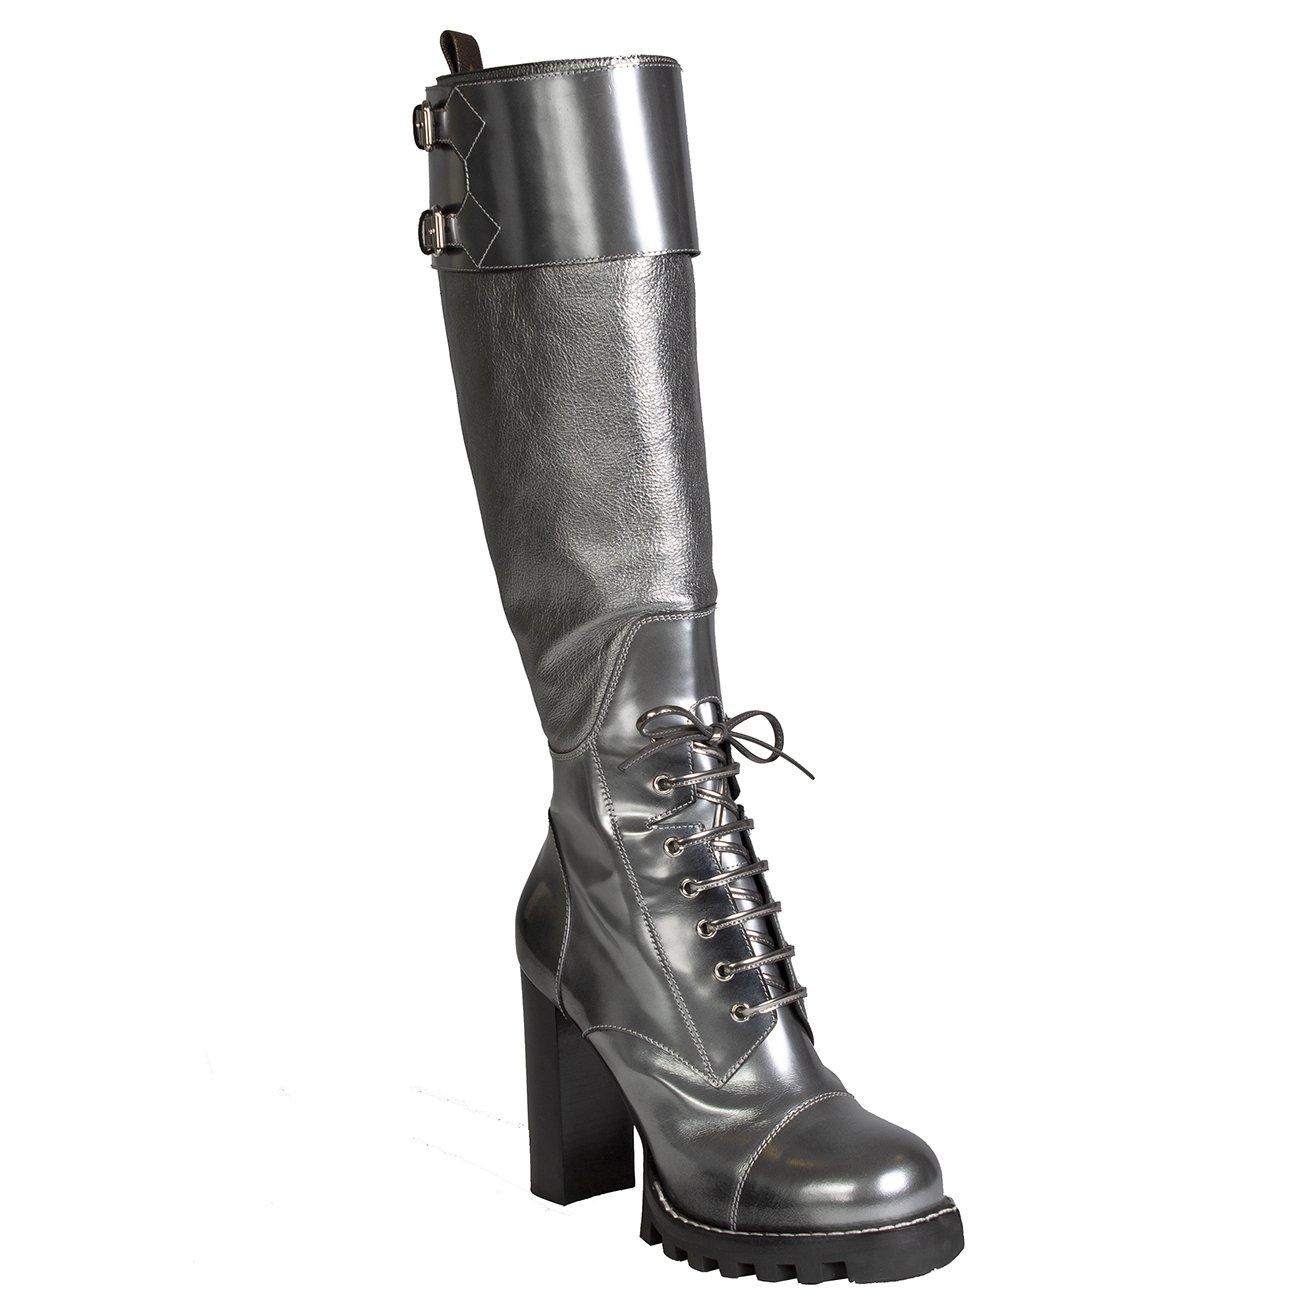 Knee high metallic leather boots by Louis Vuitton
Size 41
5